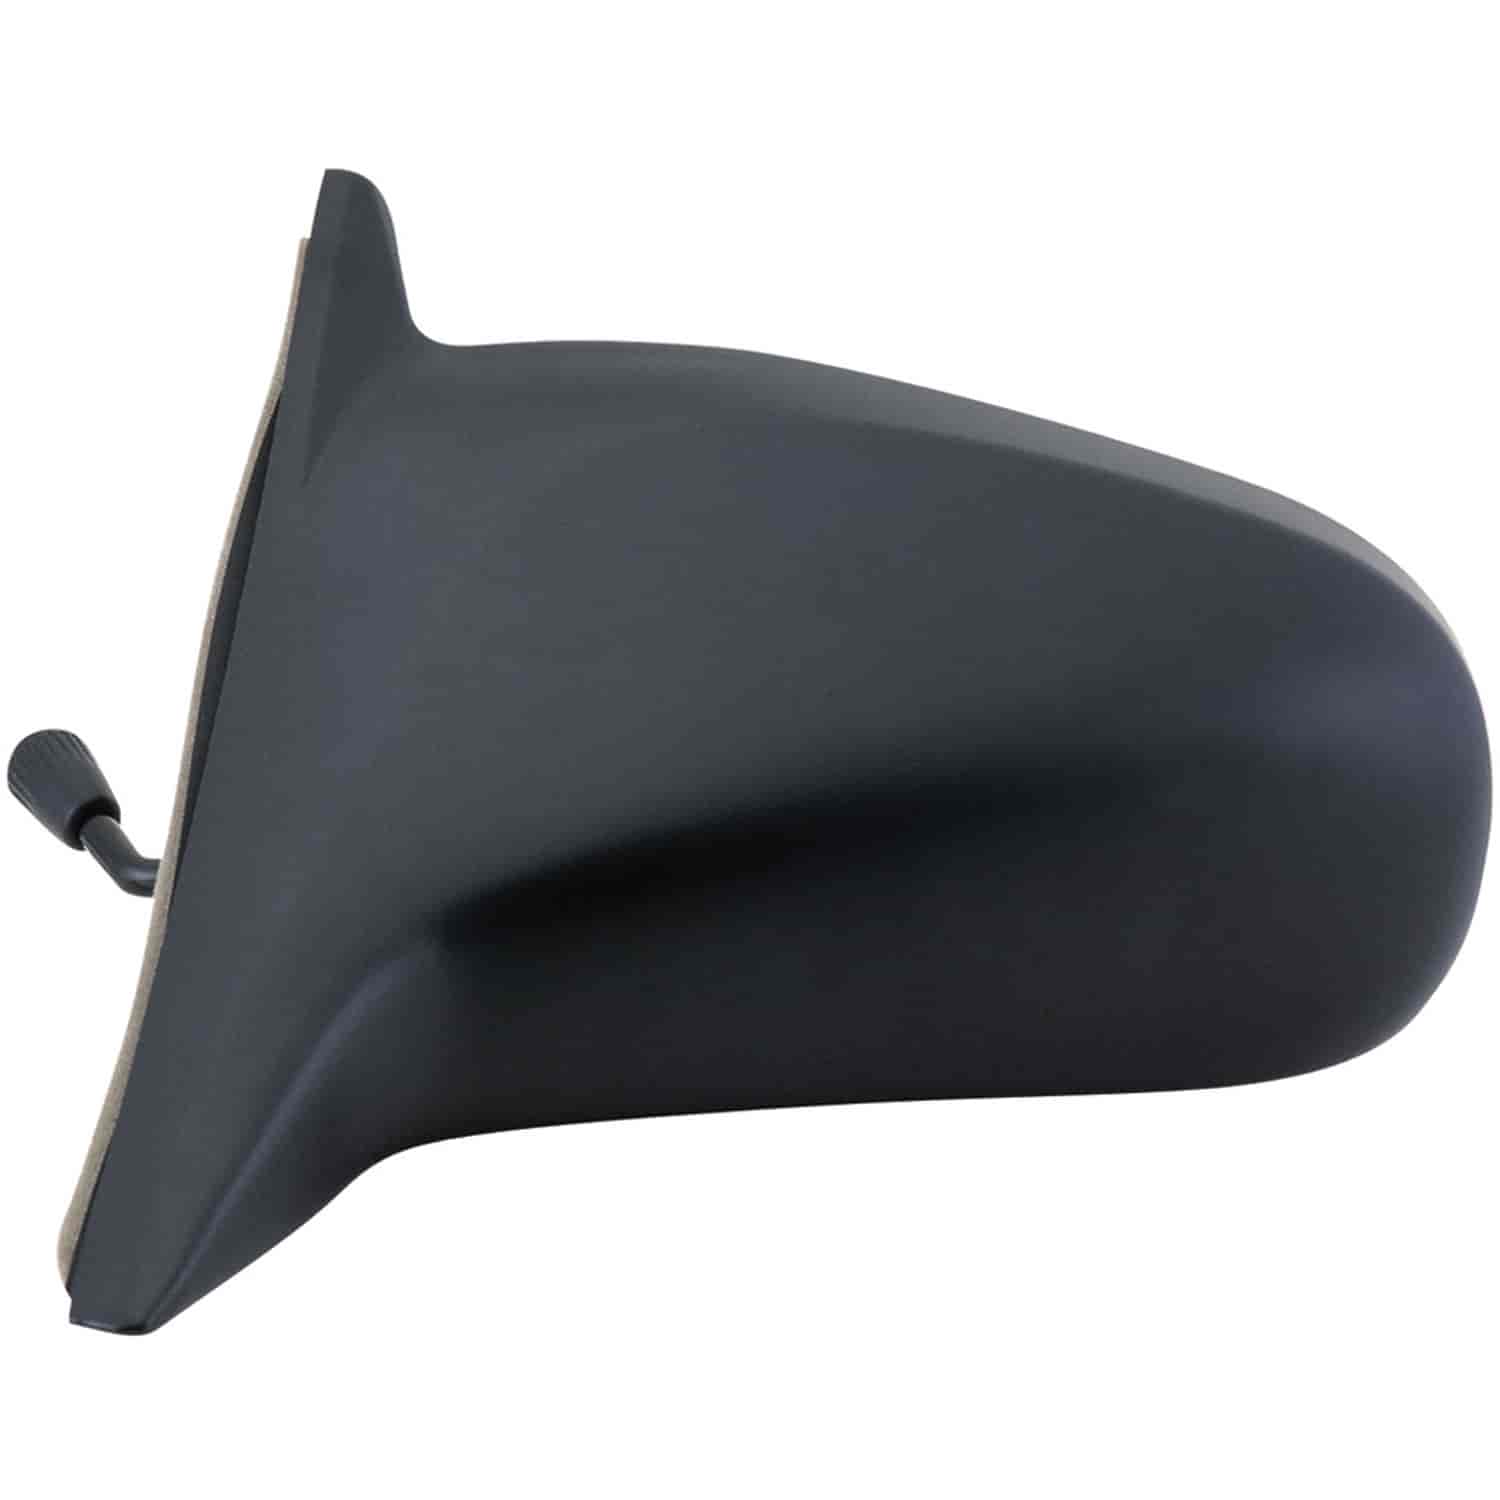 OEM Style Replacement mirror for 96-00 Honda Civic Sedan driver side mirror tested to fit and functi